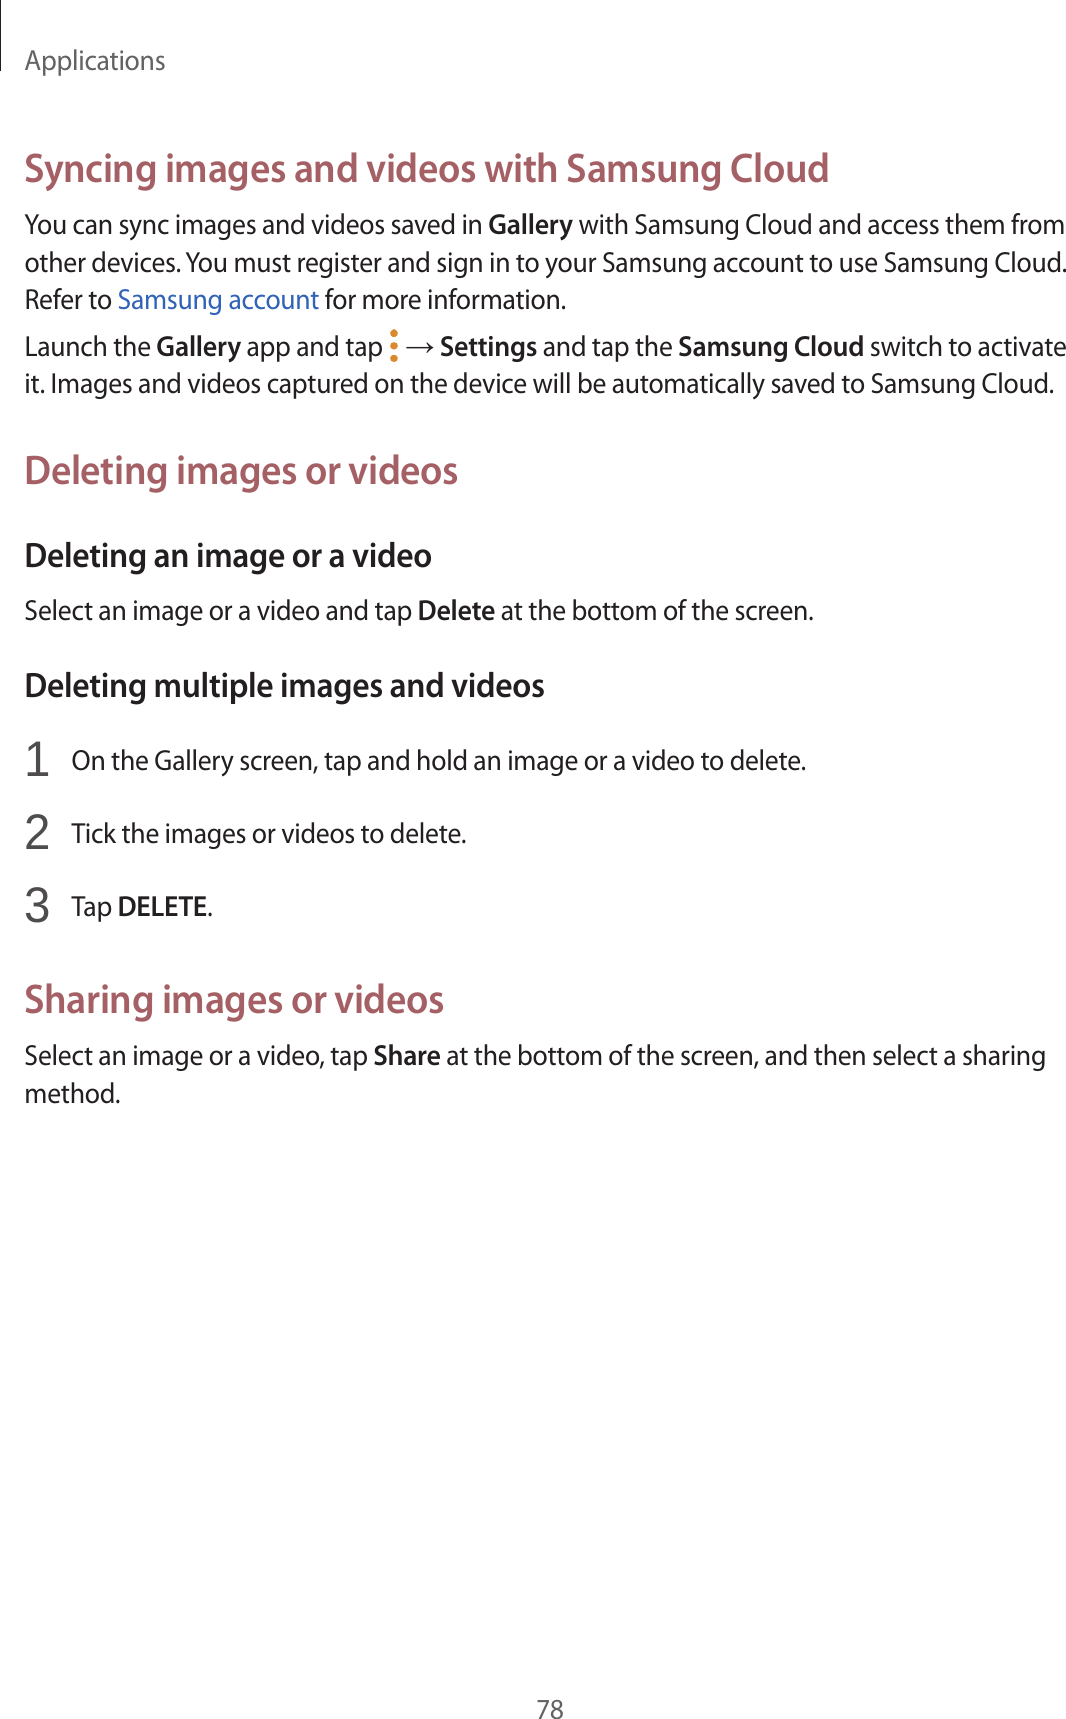 Applications78Syncing images and videos with Samsung CloudYou can sync images and videos saved in Gallery with Samsung Cloud and access them from other devices. You must register and sign in to your Samsung account to use Samsung Cloud. Refer to Samsung account for more information.Launch the Gallery app and tap   → Settings and tap the Samsung Cloud switch to activate it. Images and videos captured on the device will be automatically saved to Samsung Cloud.Deleting images or videosDeleting an image or a videoSelect an image or a video and tap Delete at the bottom of the screen.Deleting multiple images and videos1  On the Gallery screen, tap and hold an image or a video to delete.2  Tick the images or videos to delete.3  Tap DELETE.Sharing images or videosSelect an image or a video, tap Share at the bottom of the screen, and then select a sharing method.